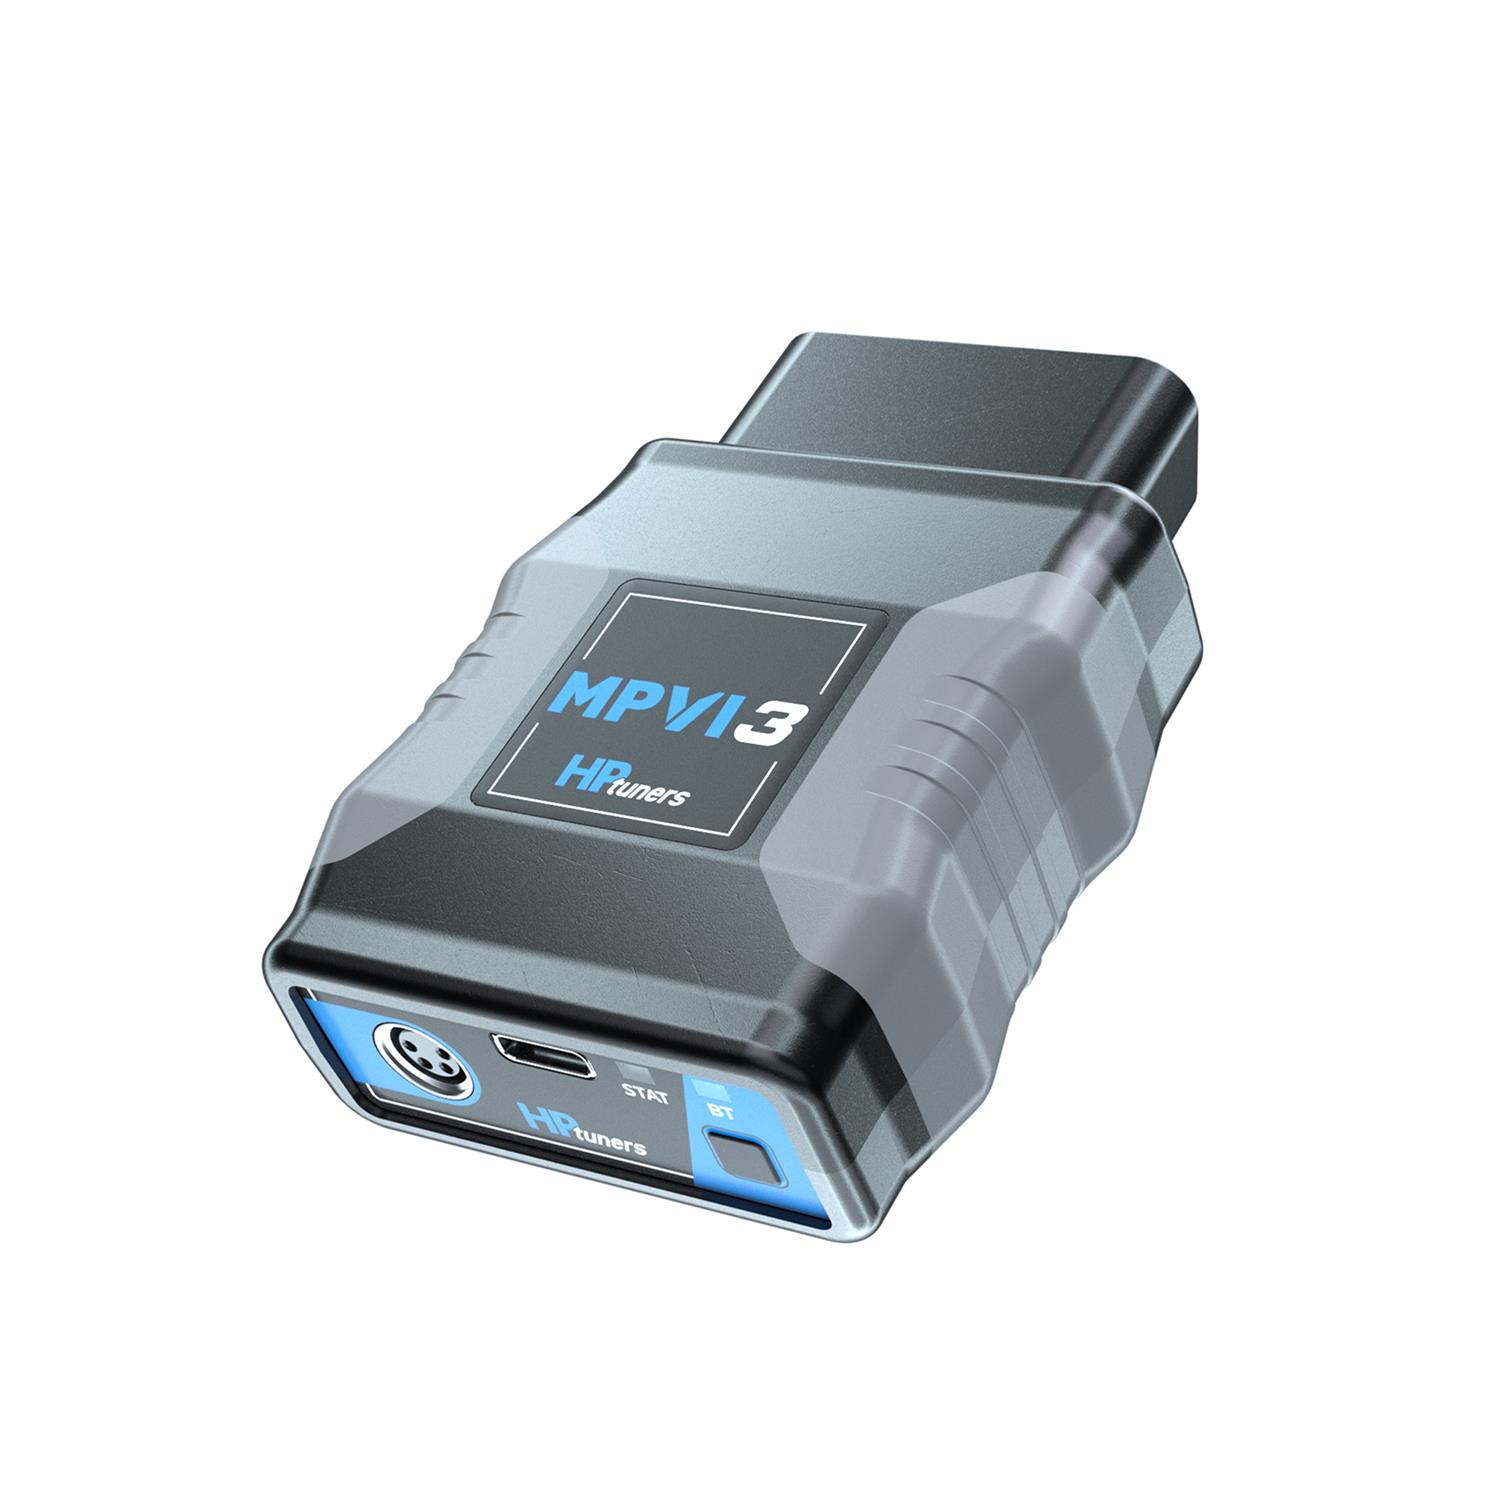 HP Tuners VCM Suite MPVI3 Credit Pro Packages M03-000-06 the latest generation of hardware from HP Tuners